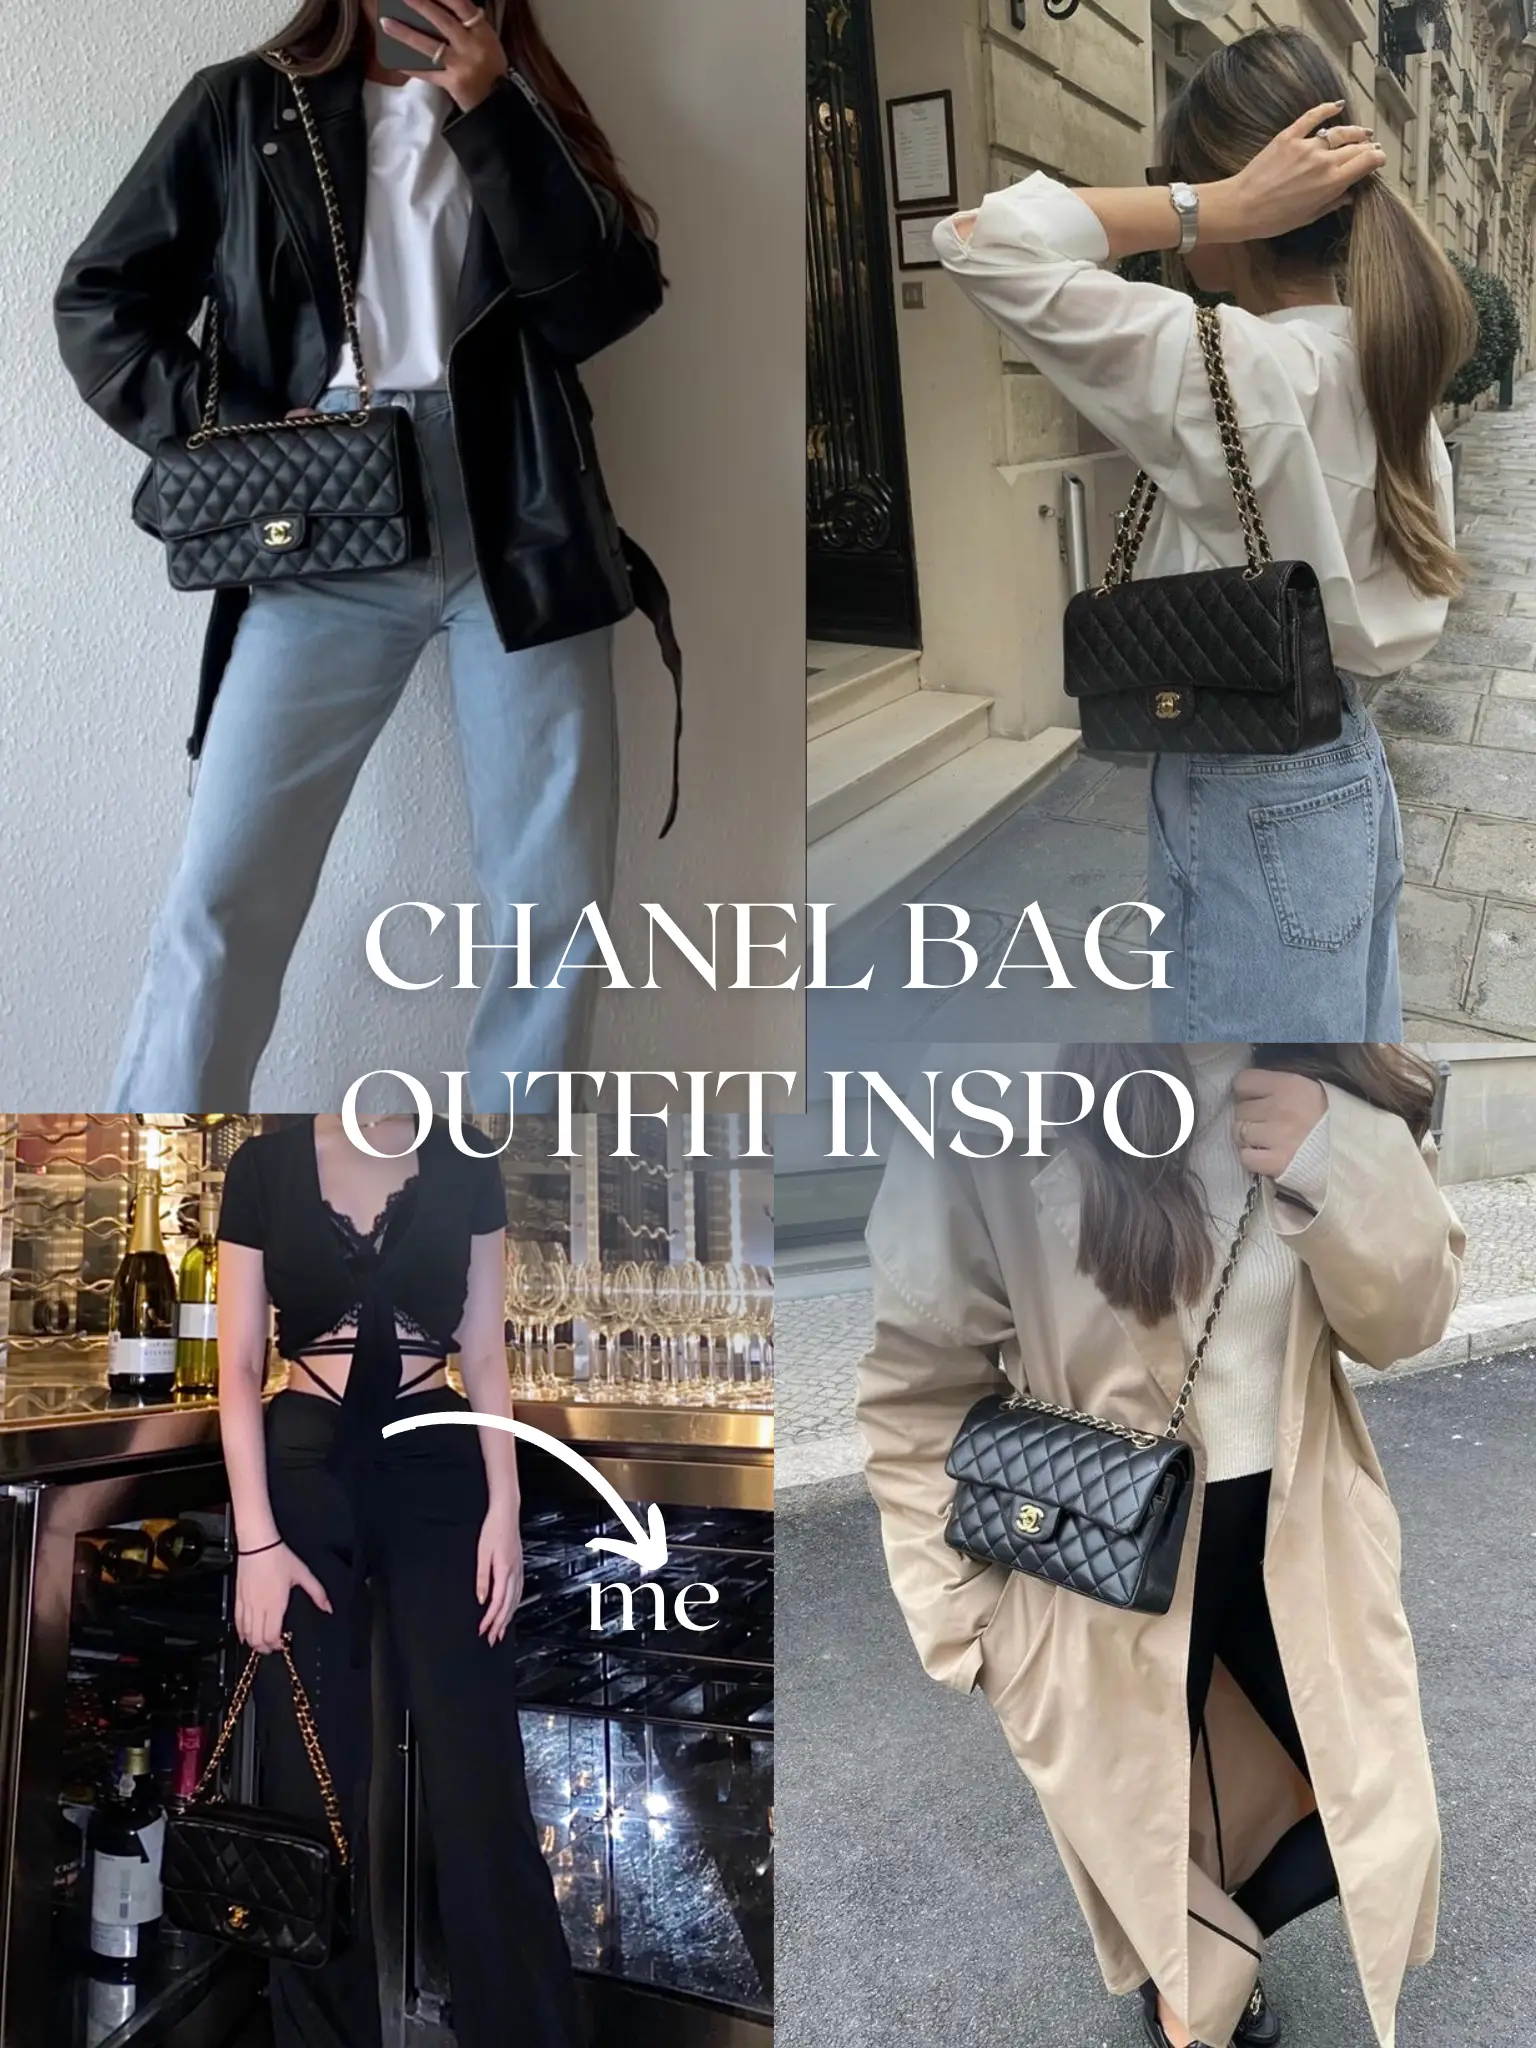 CHANEL CLASSIC BAG REVIEW, Gallery posted by Ashlee Leady